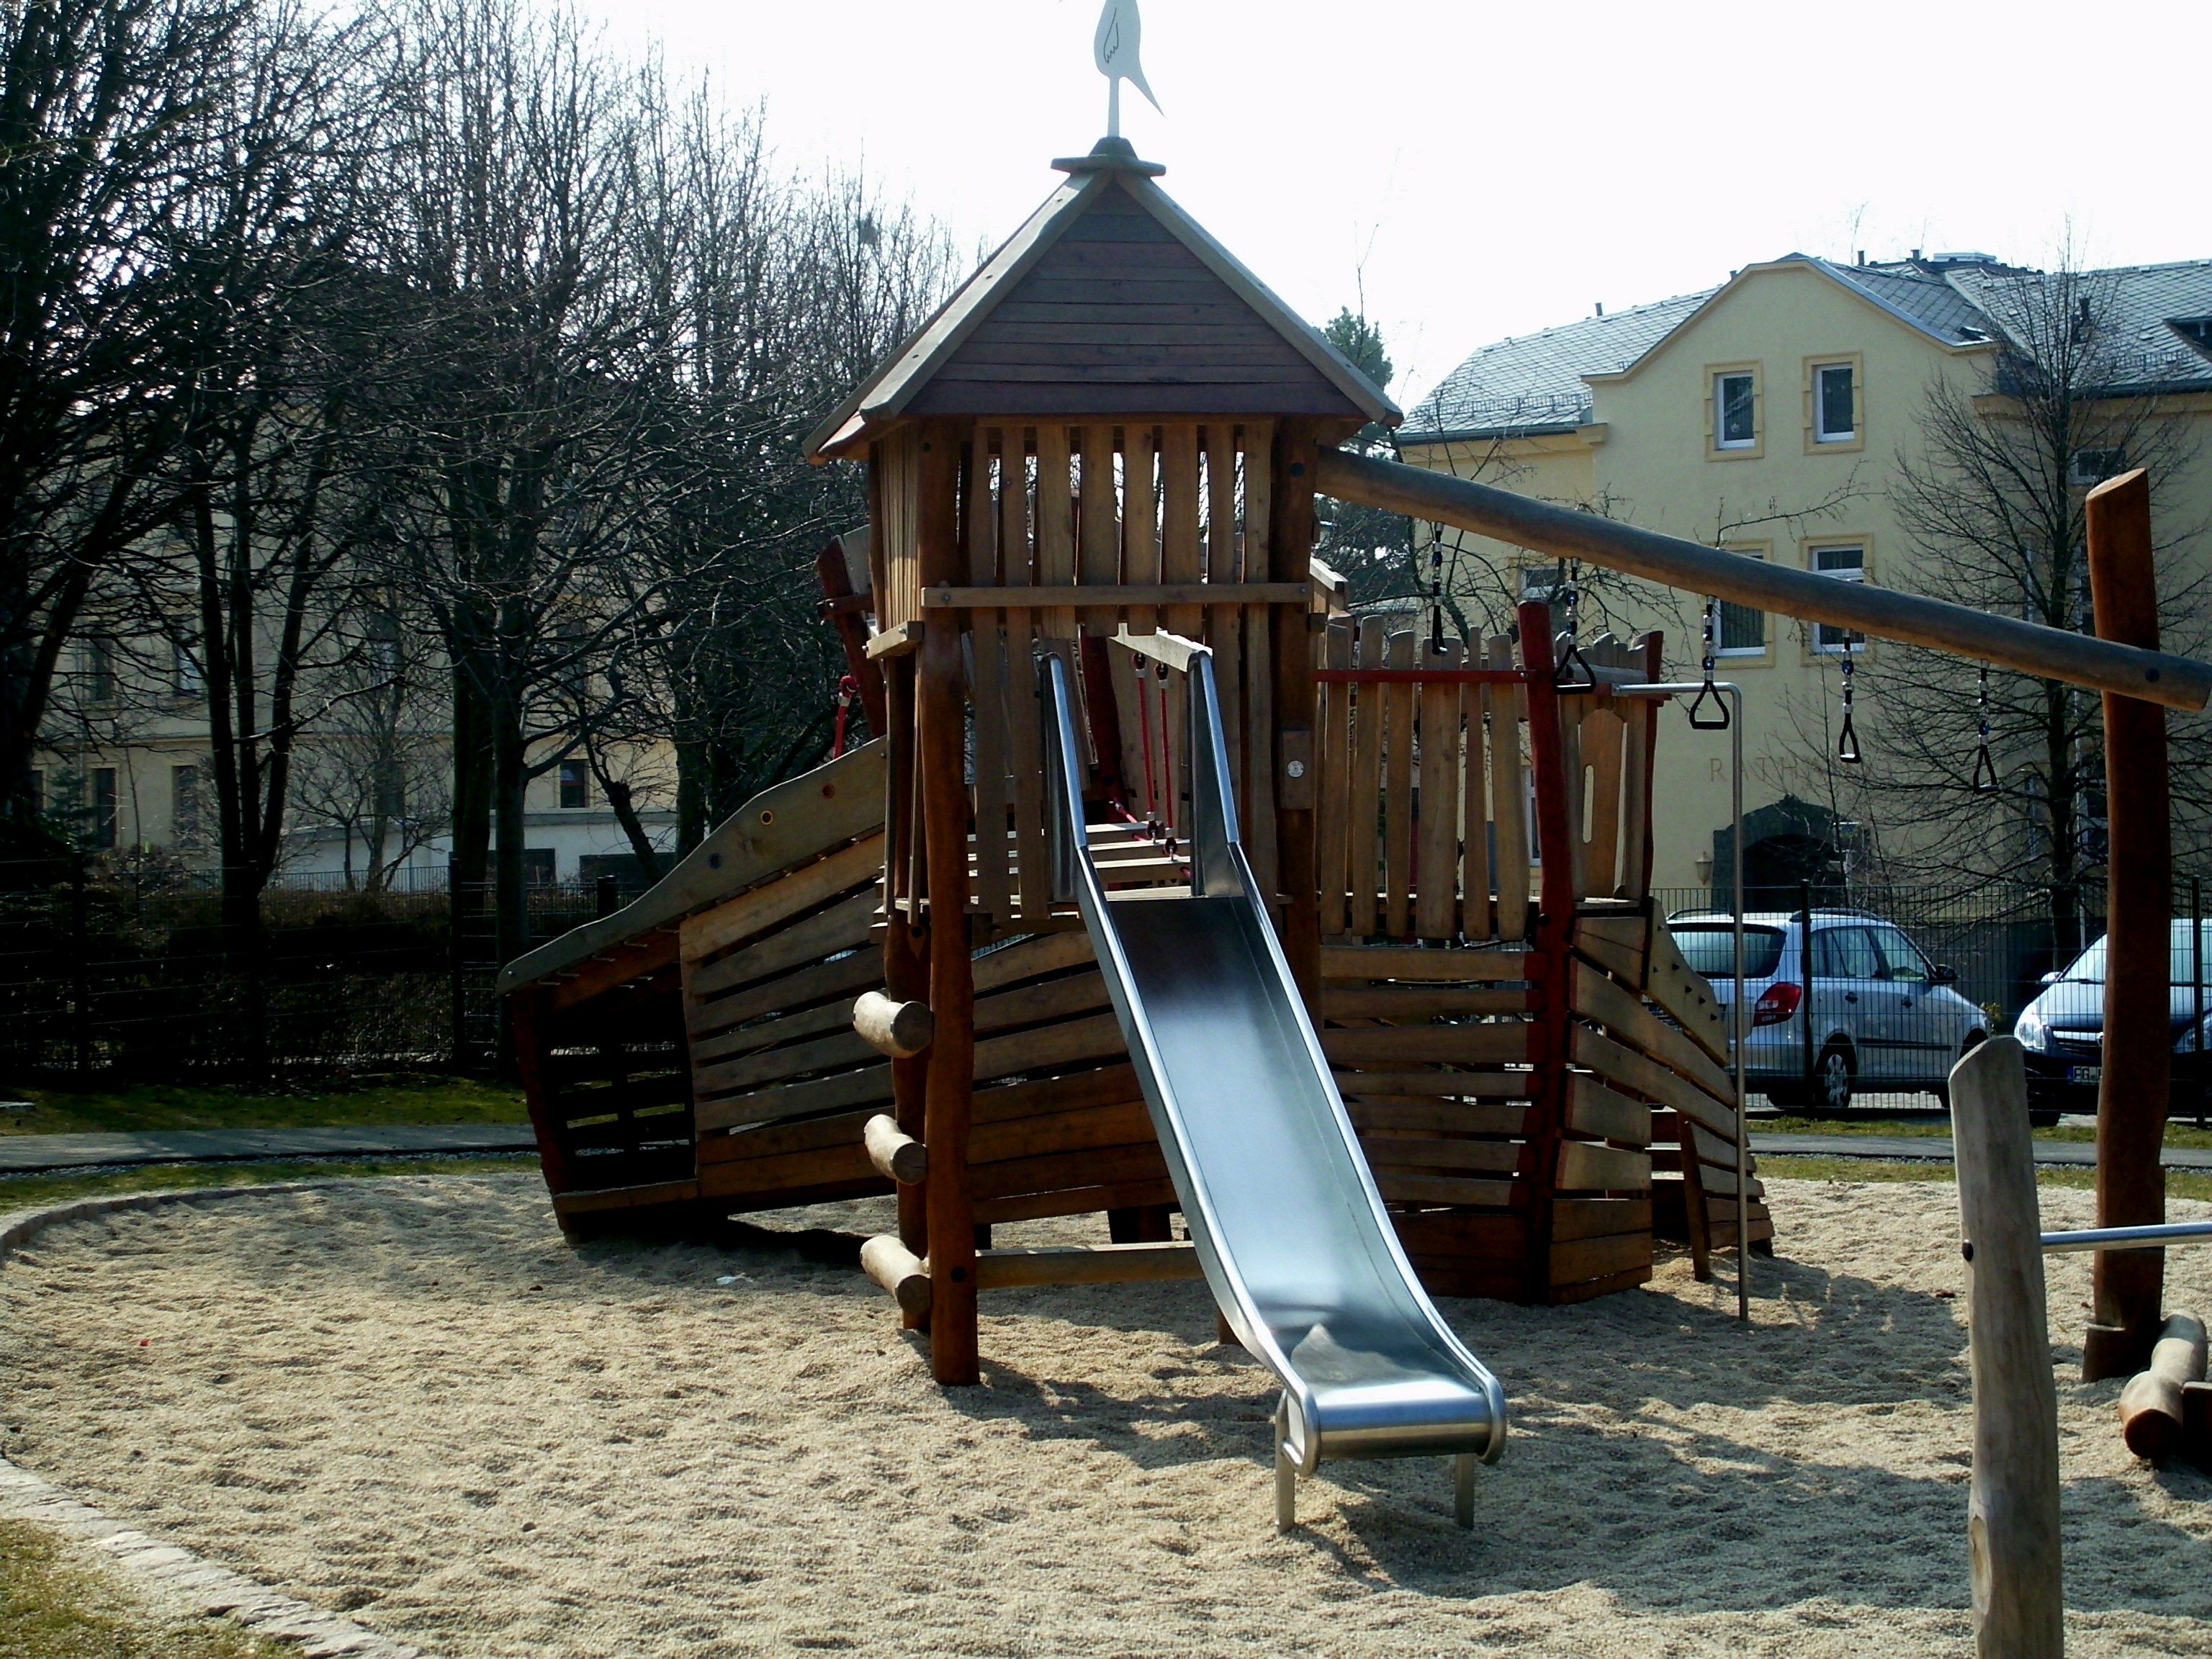 brown wooden swing and slide set